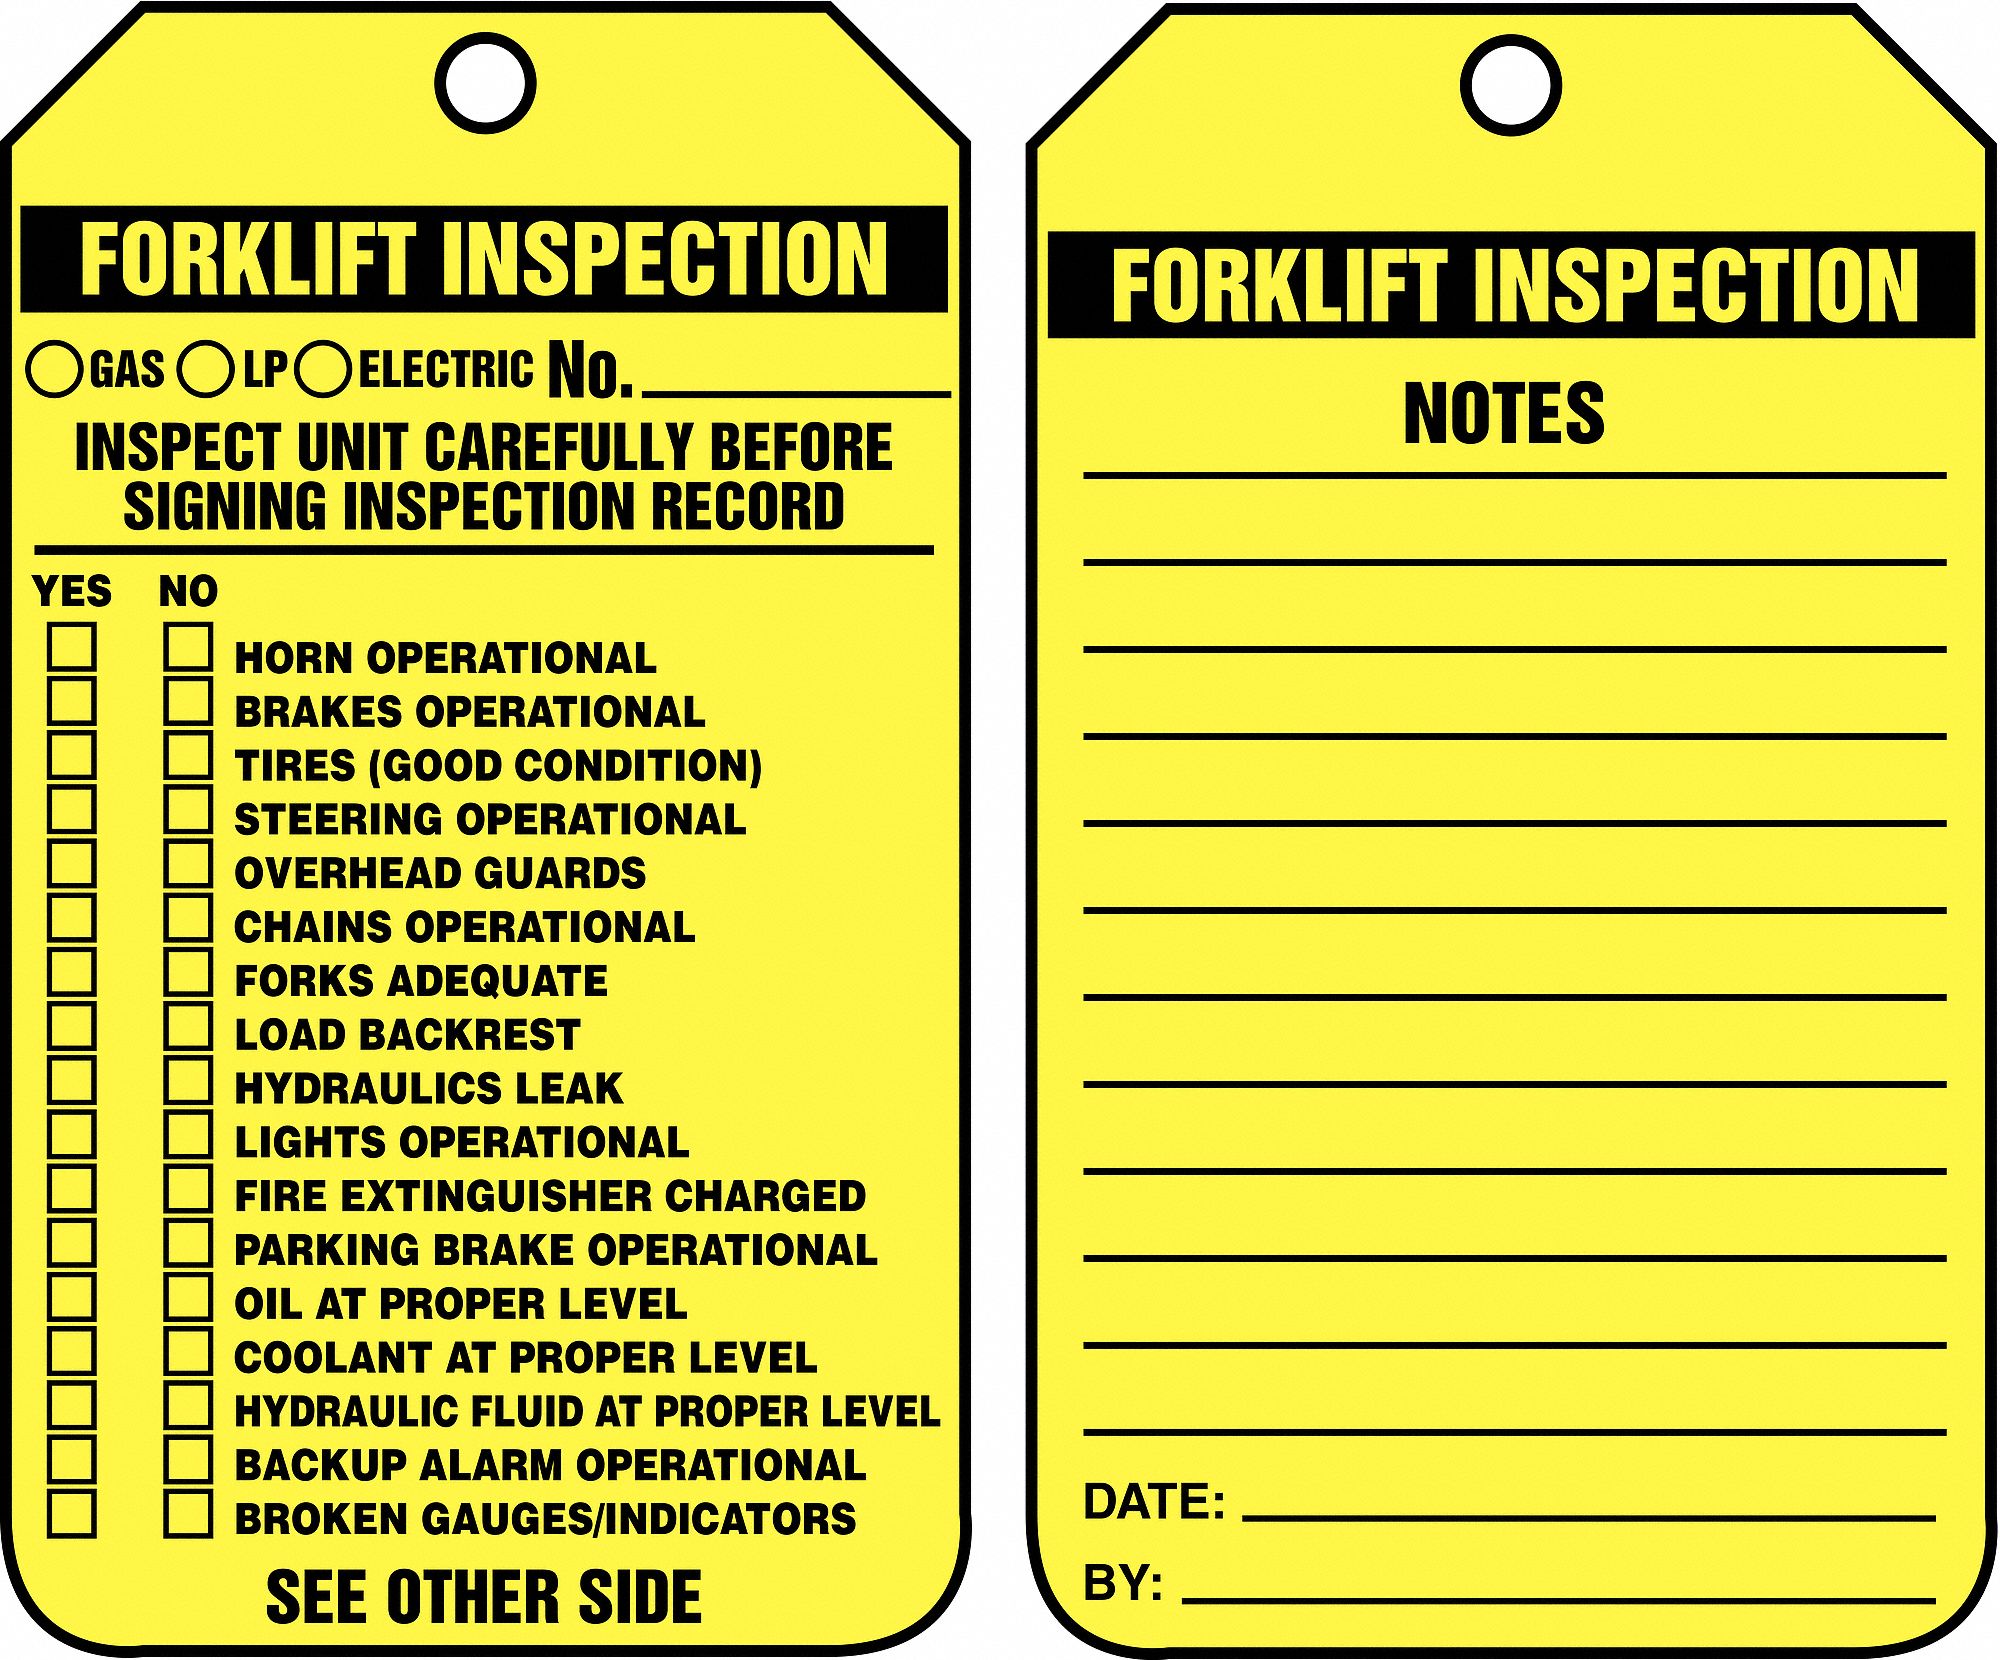 Inspection Tag,5-3/4 x 3-1/4,PK25